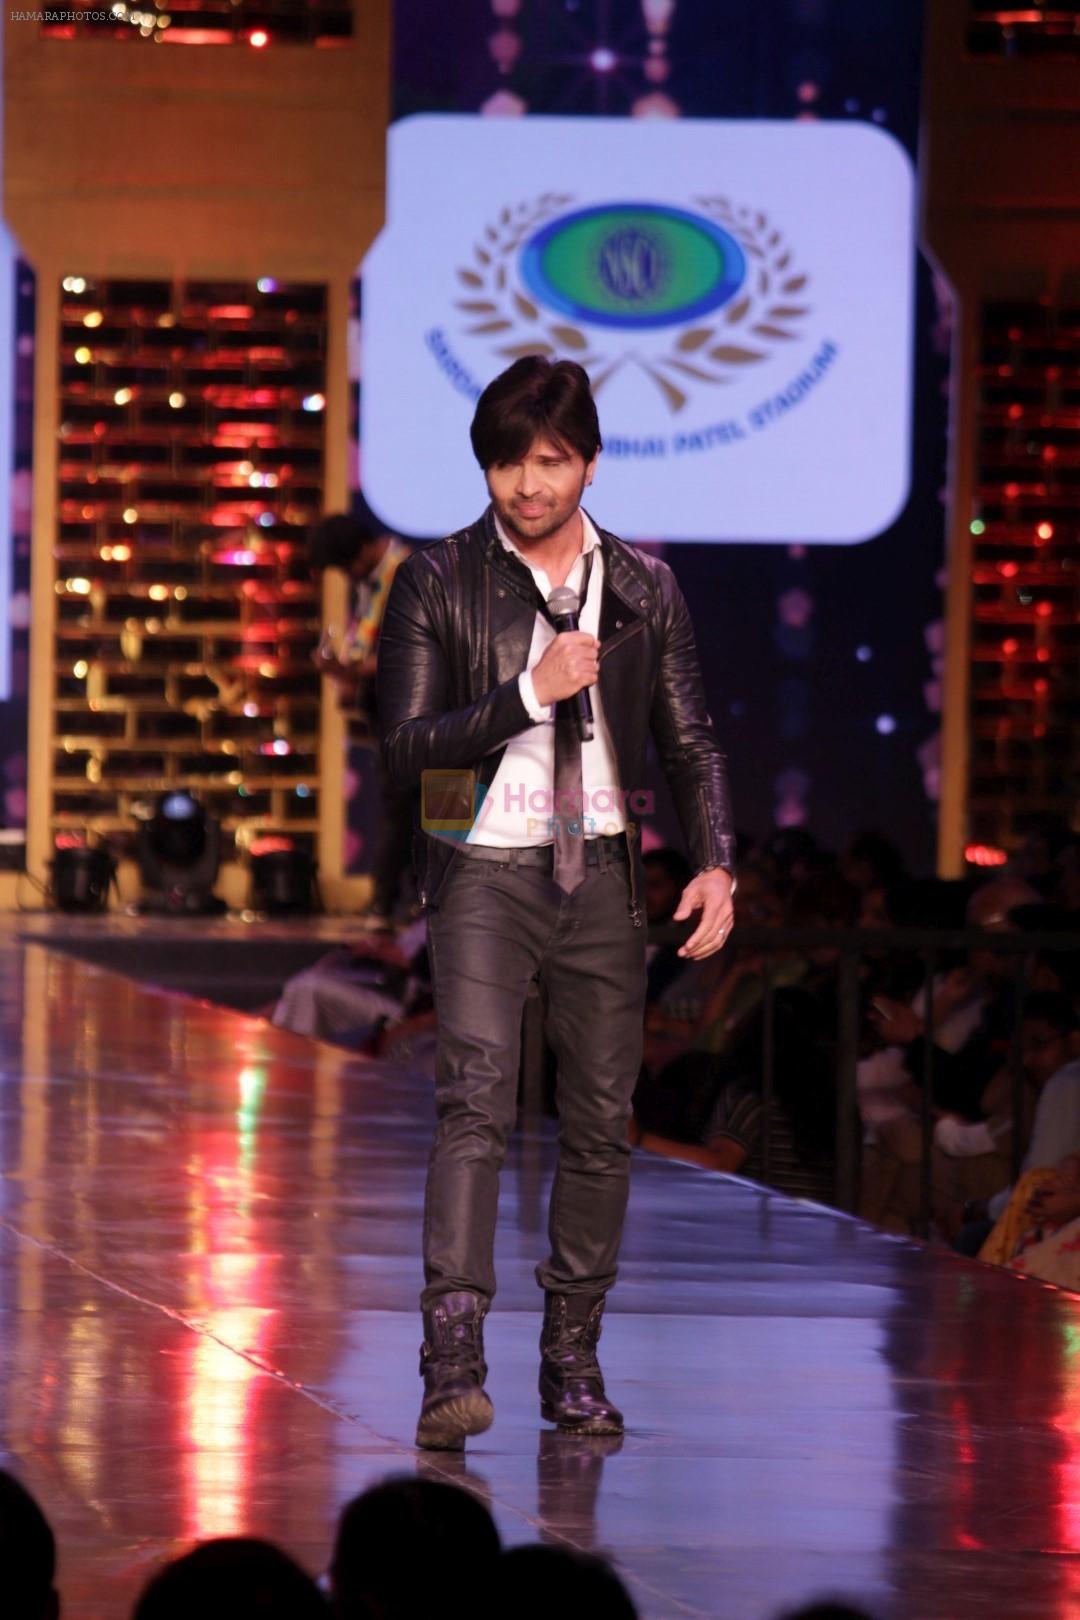 Himesh Reshammiya walk the Ramp For Cancer Patients at Fevicol Caring with Style on 26th Feb 2017